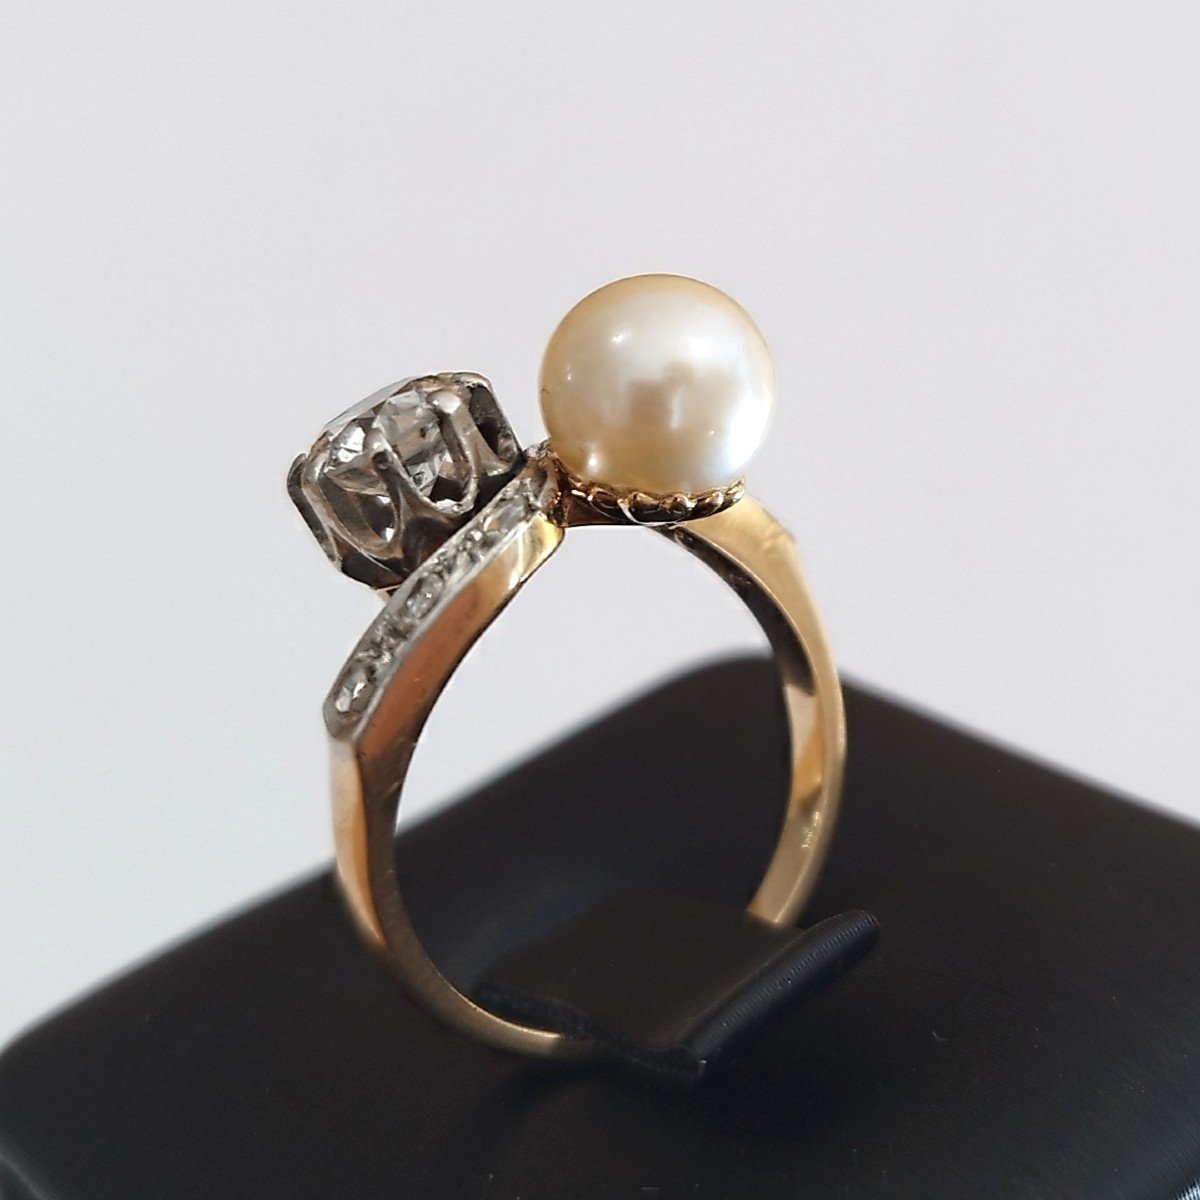 Toi&moi Ring From The 1920s. 18k Gold, Diamonds And Pearl.-photo-2